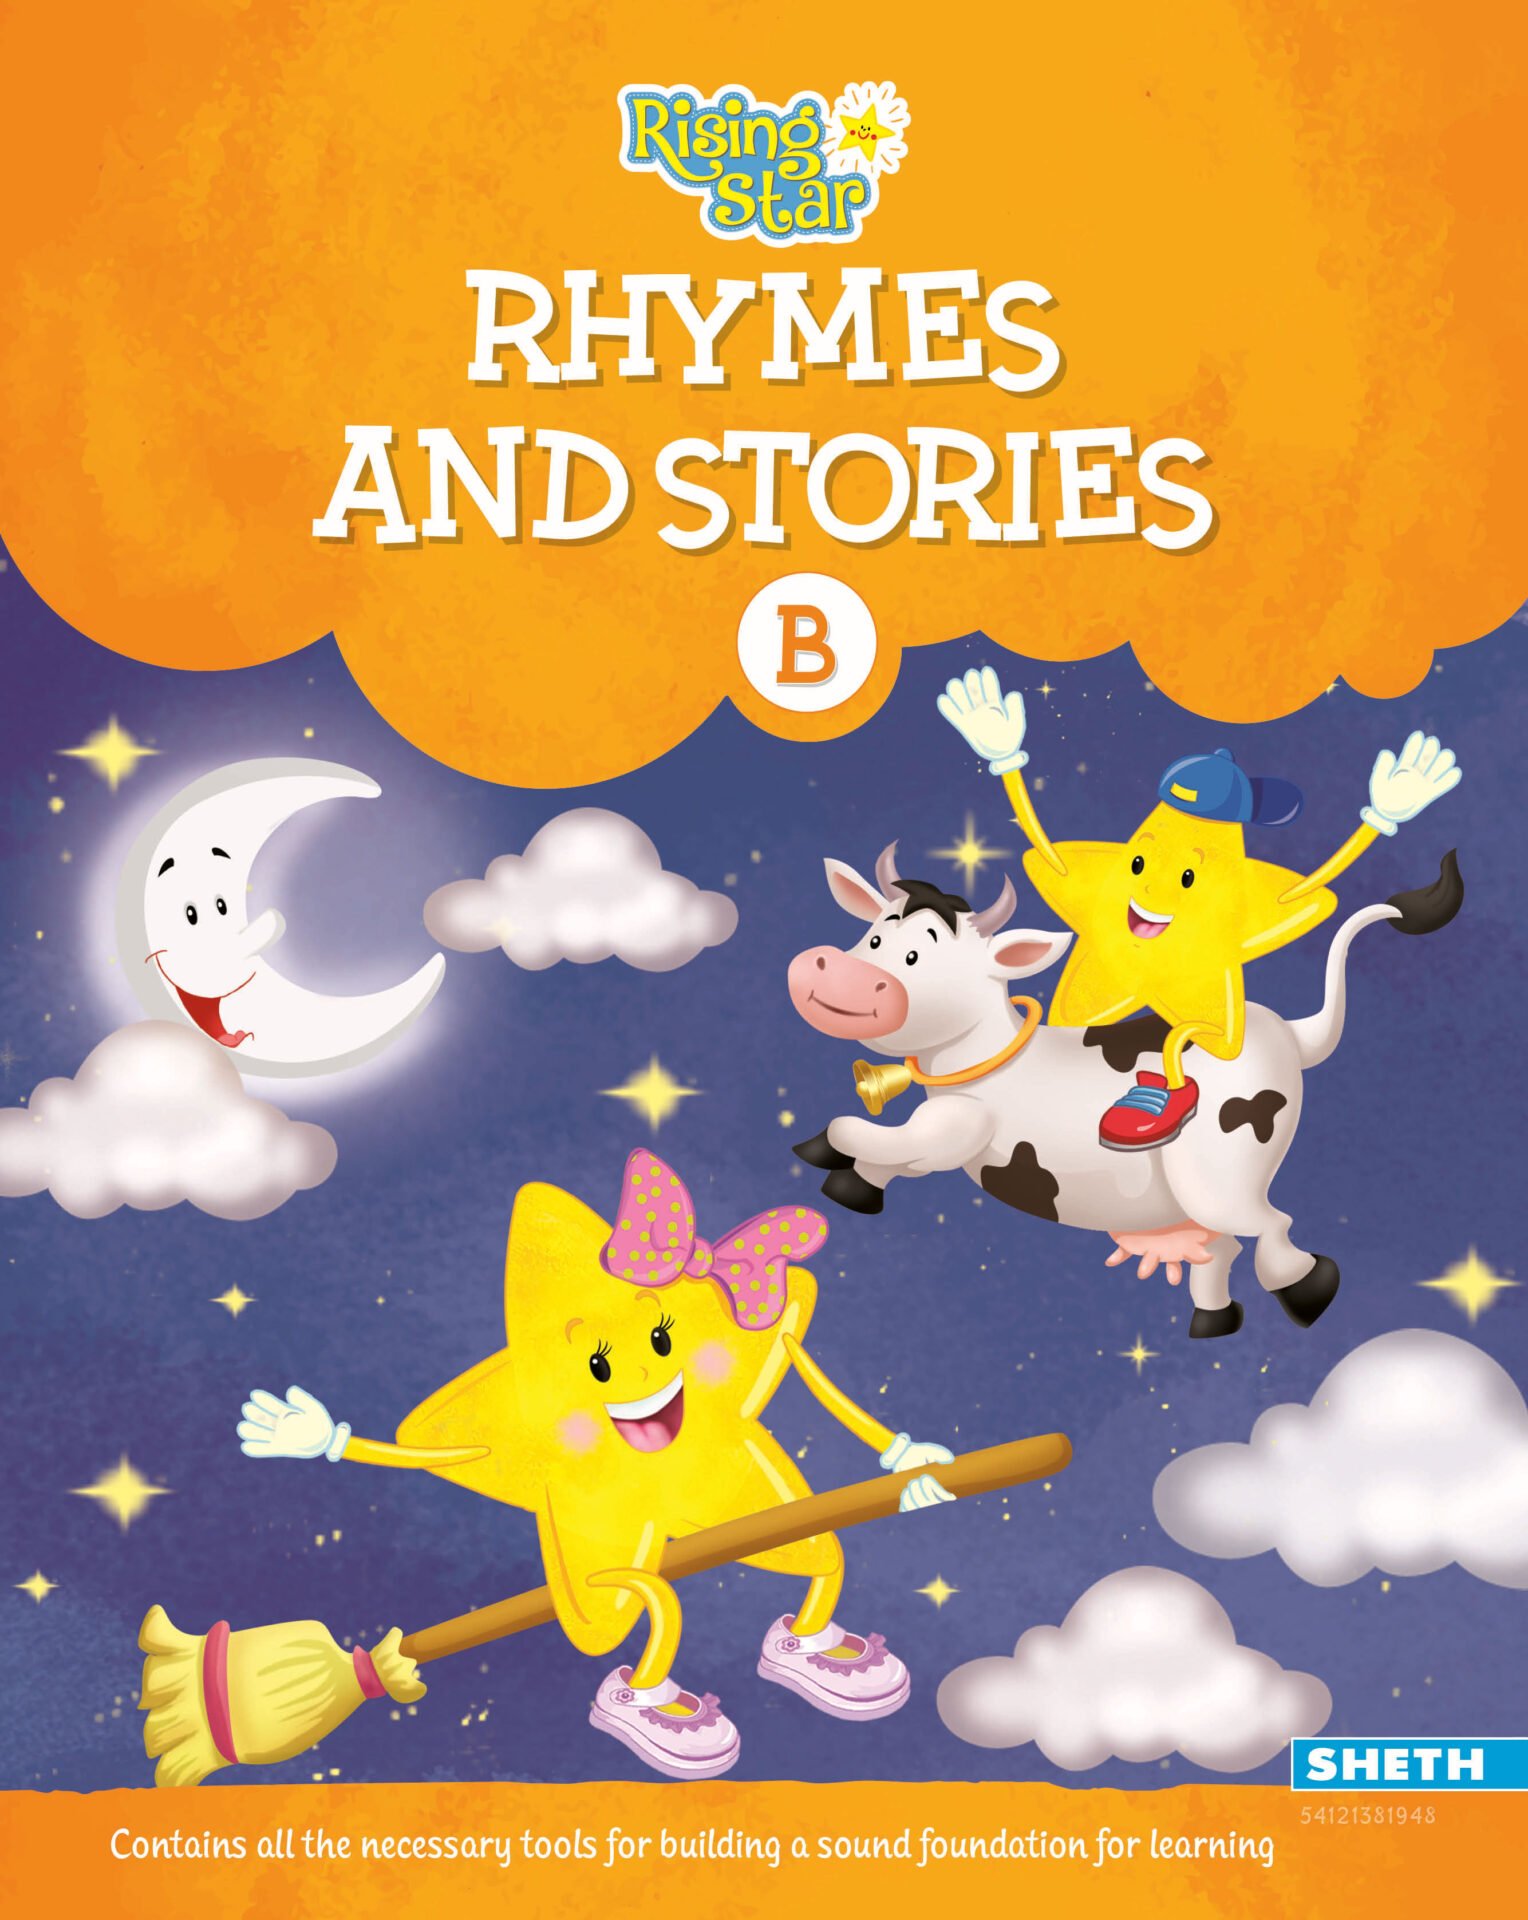 Rising Star Rhymes and Stories B 1 1